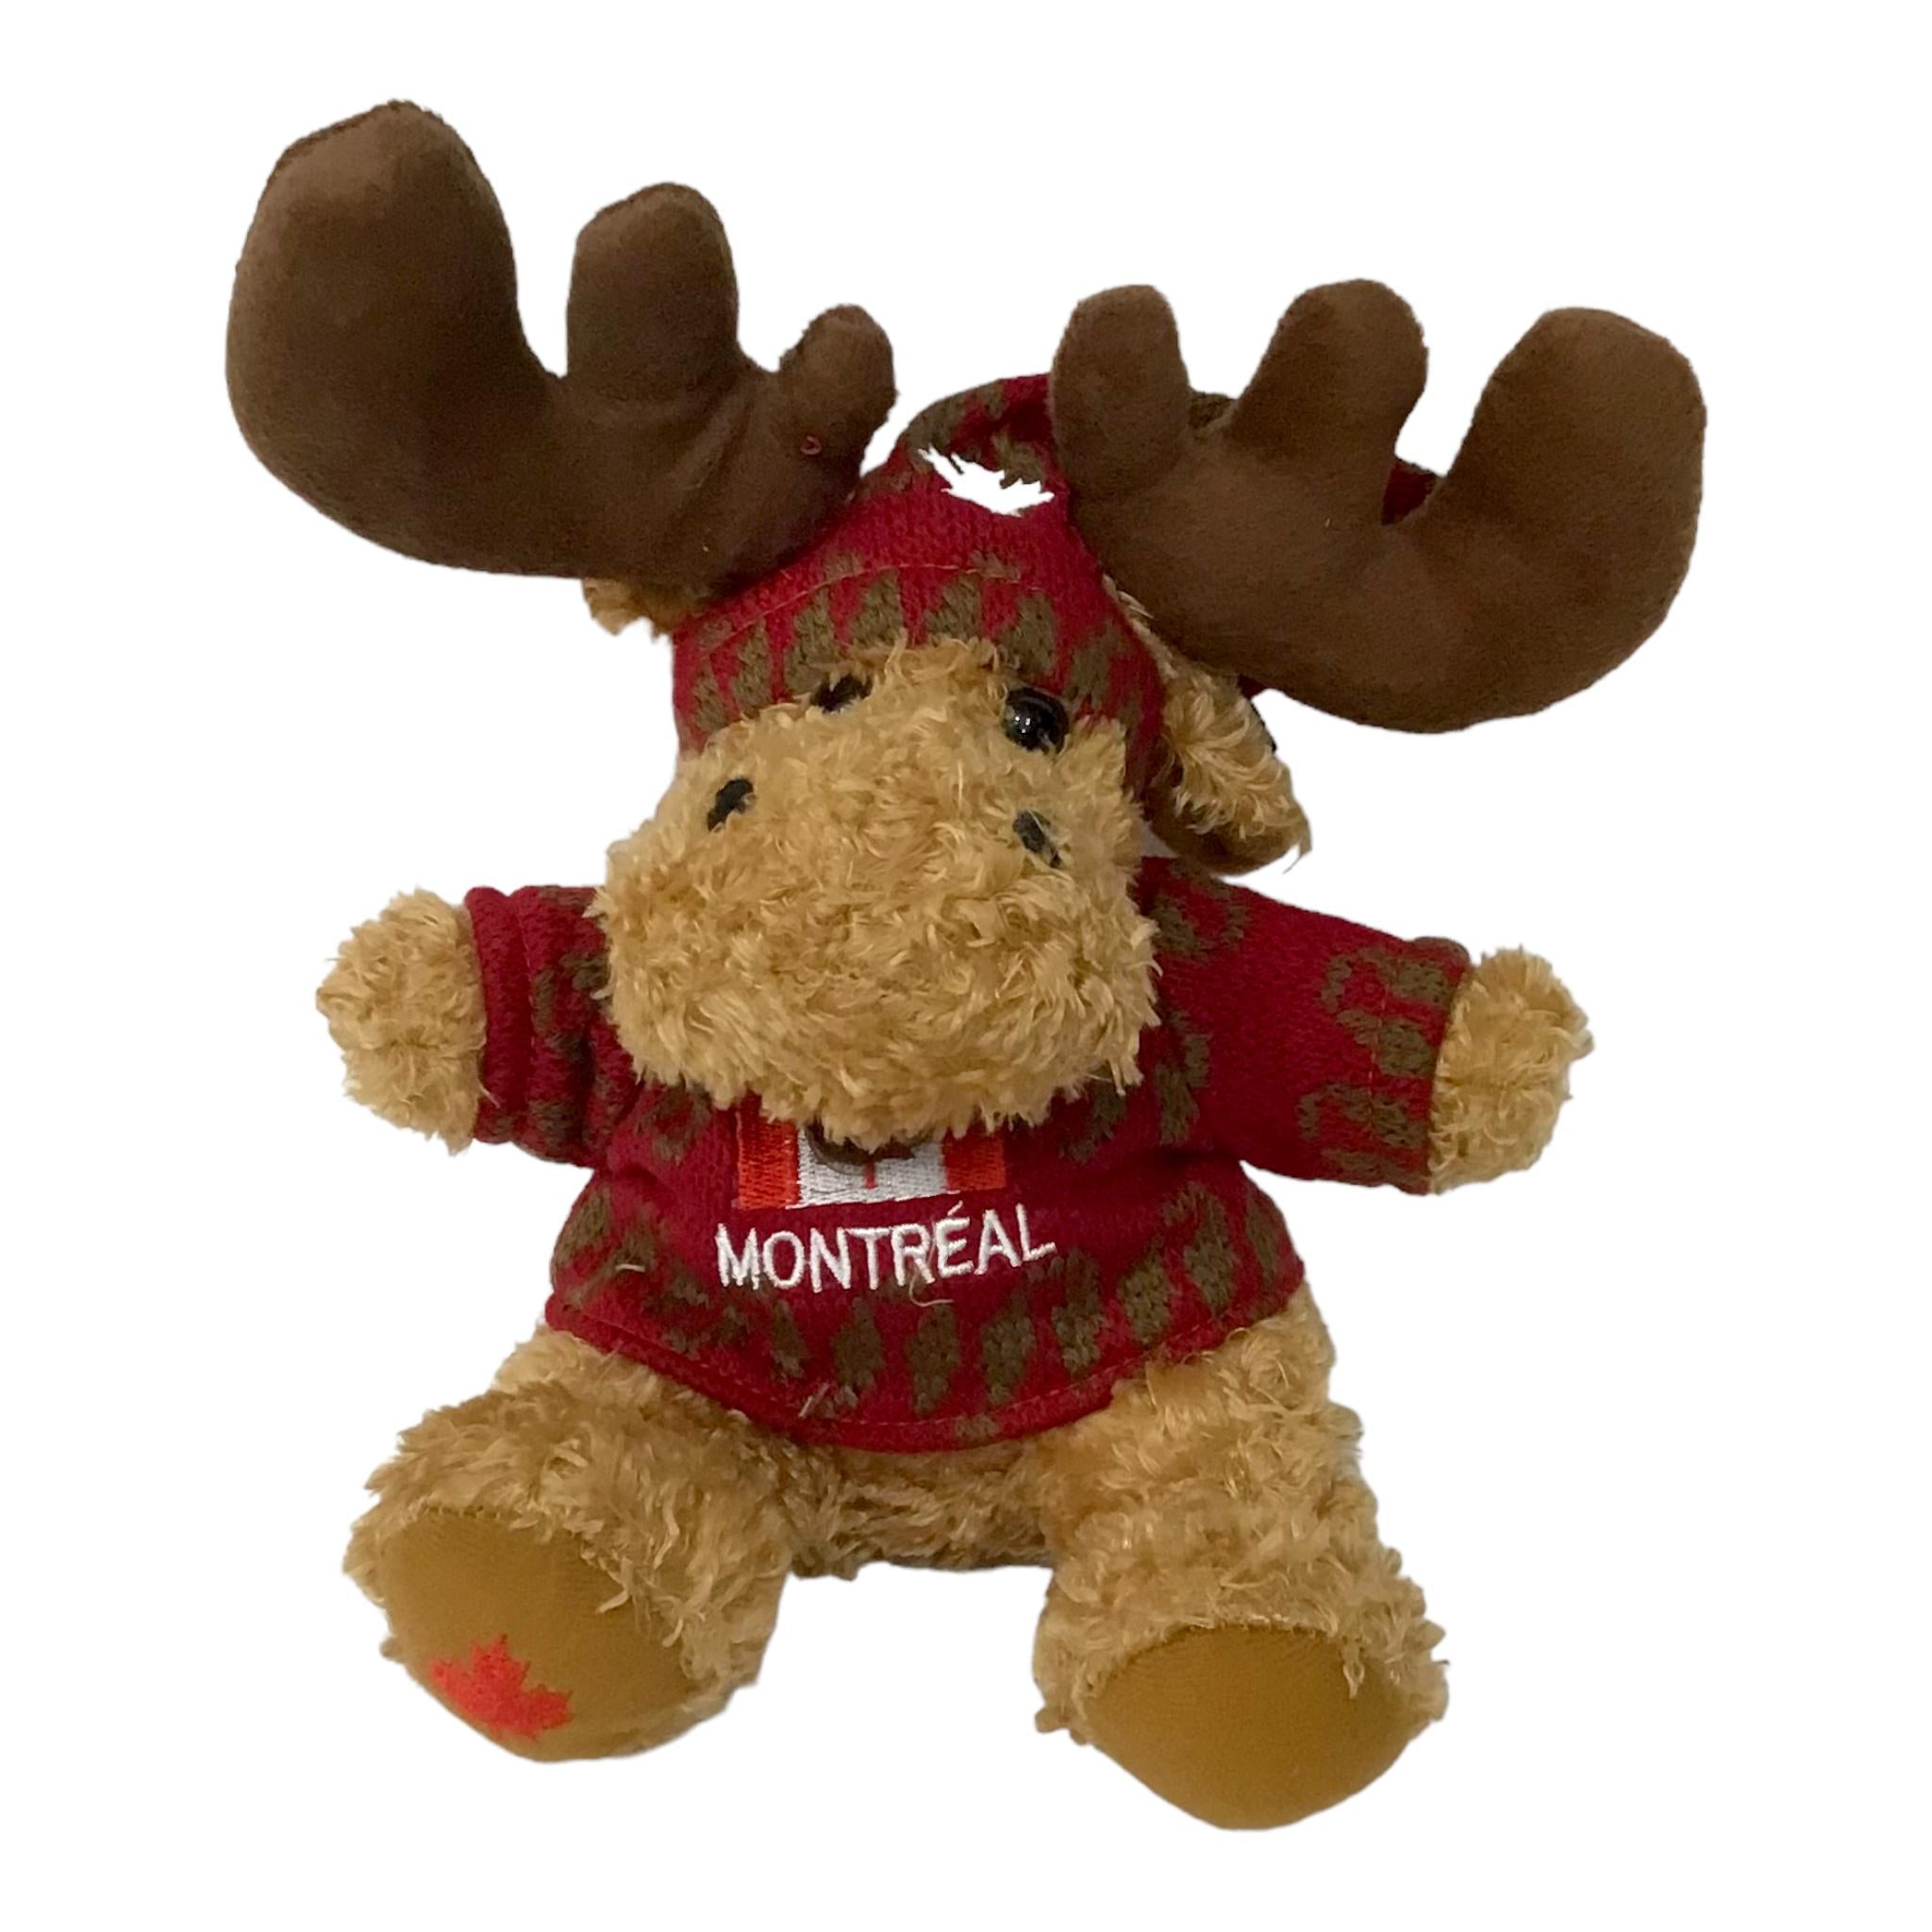 MOOSE MONTRÉAL STUFFED ANIMAL 9” W/ RED GREEN KNITTING SWEATER CANADA FLAG EMBROIDERY & MAPLE LEAF HAT